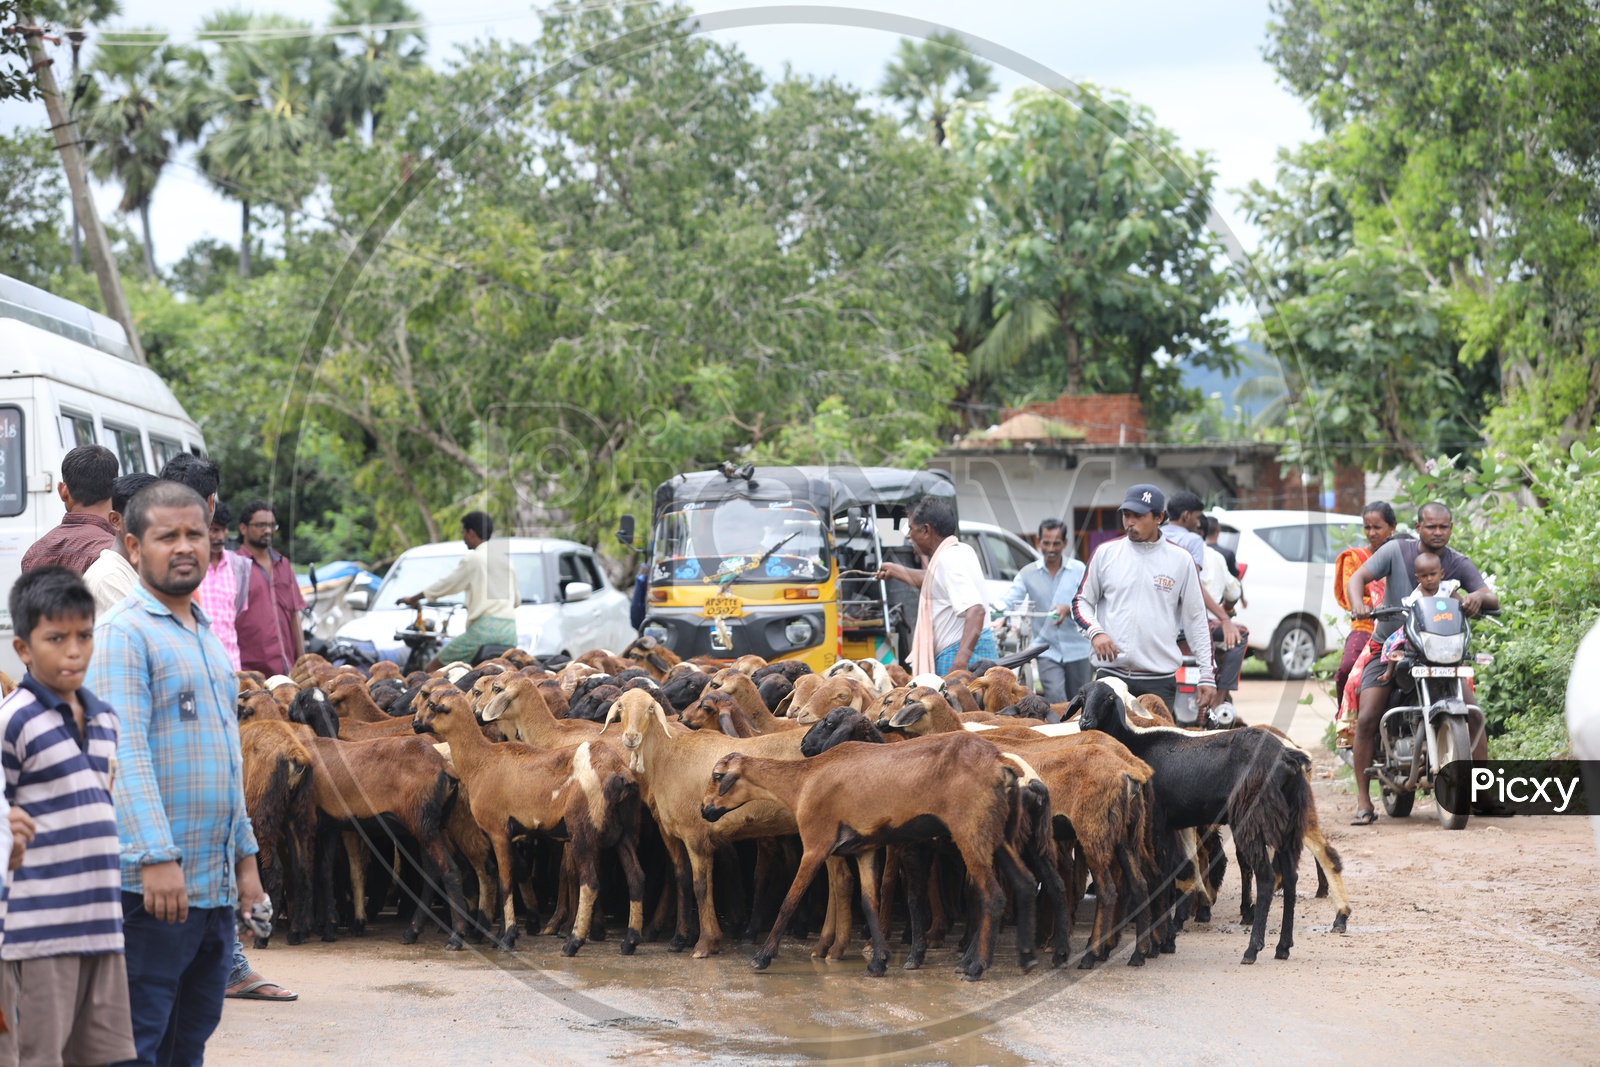 Indian People stuck on the road by the Goat tribe